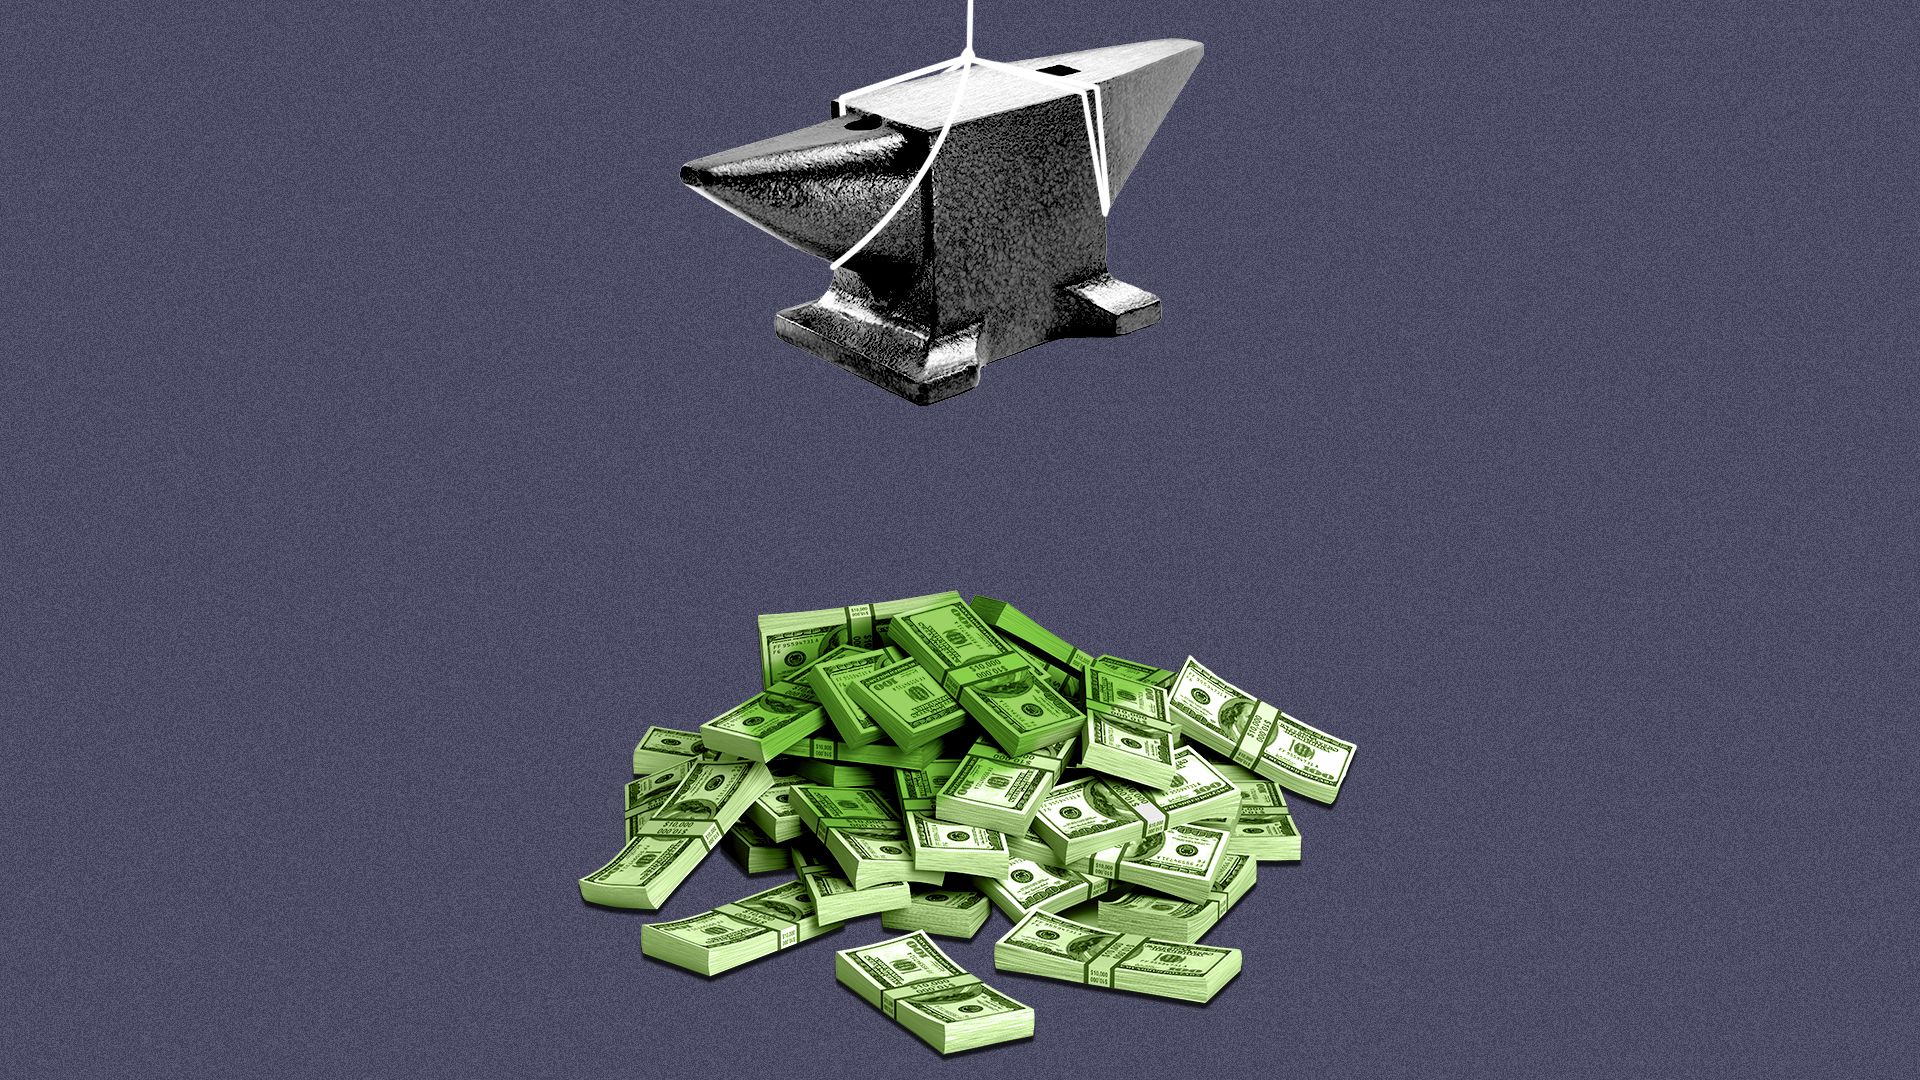 Illustration of an anvil hanging over a pile of cash